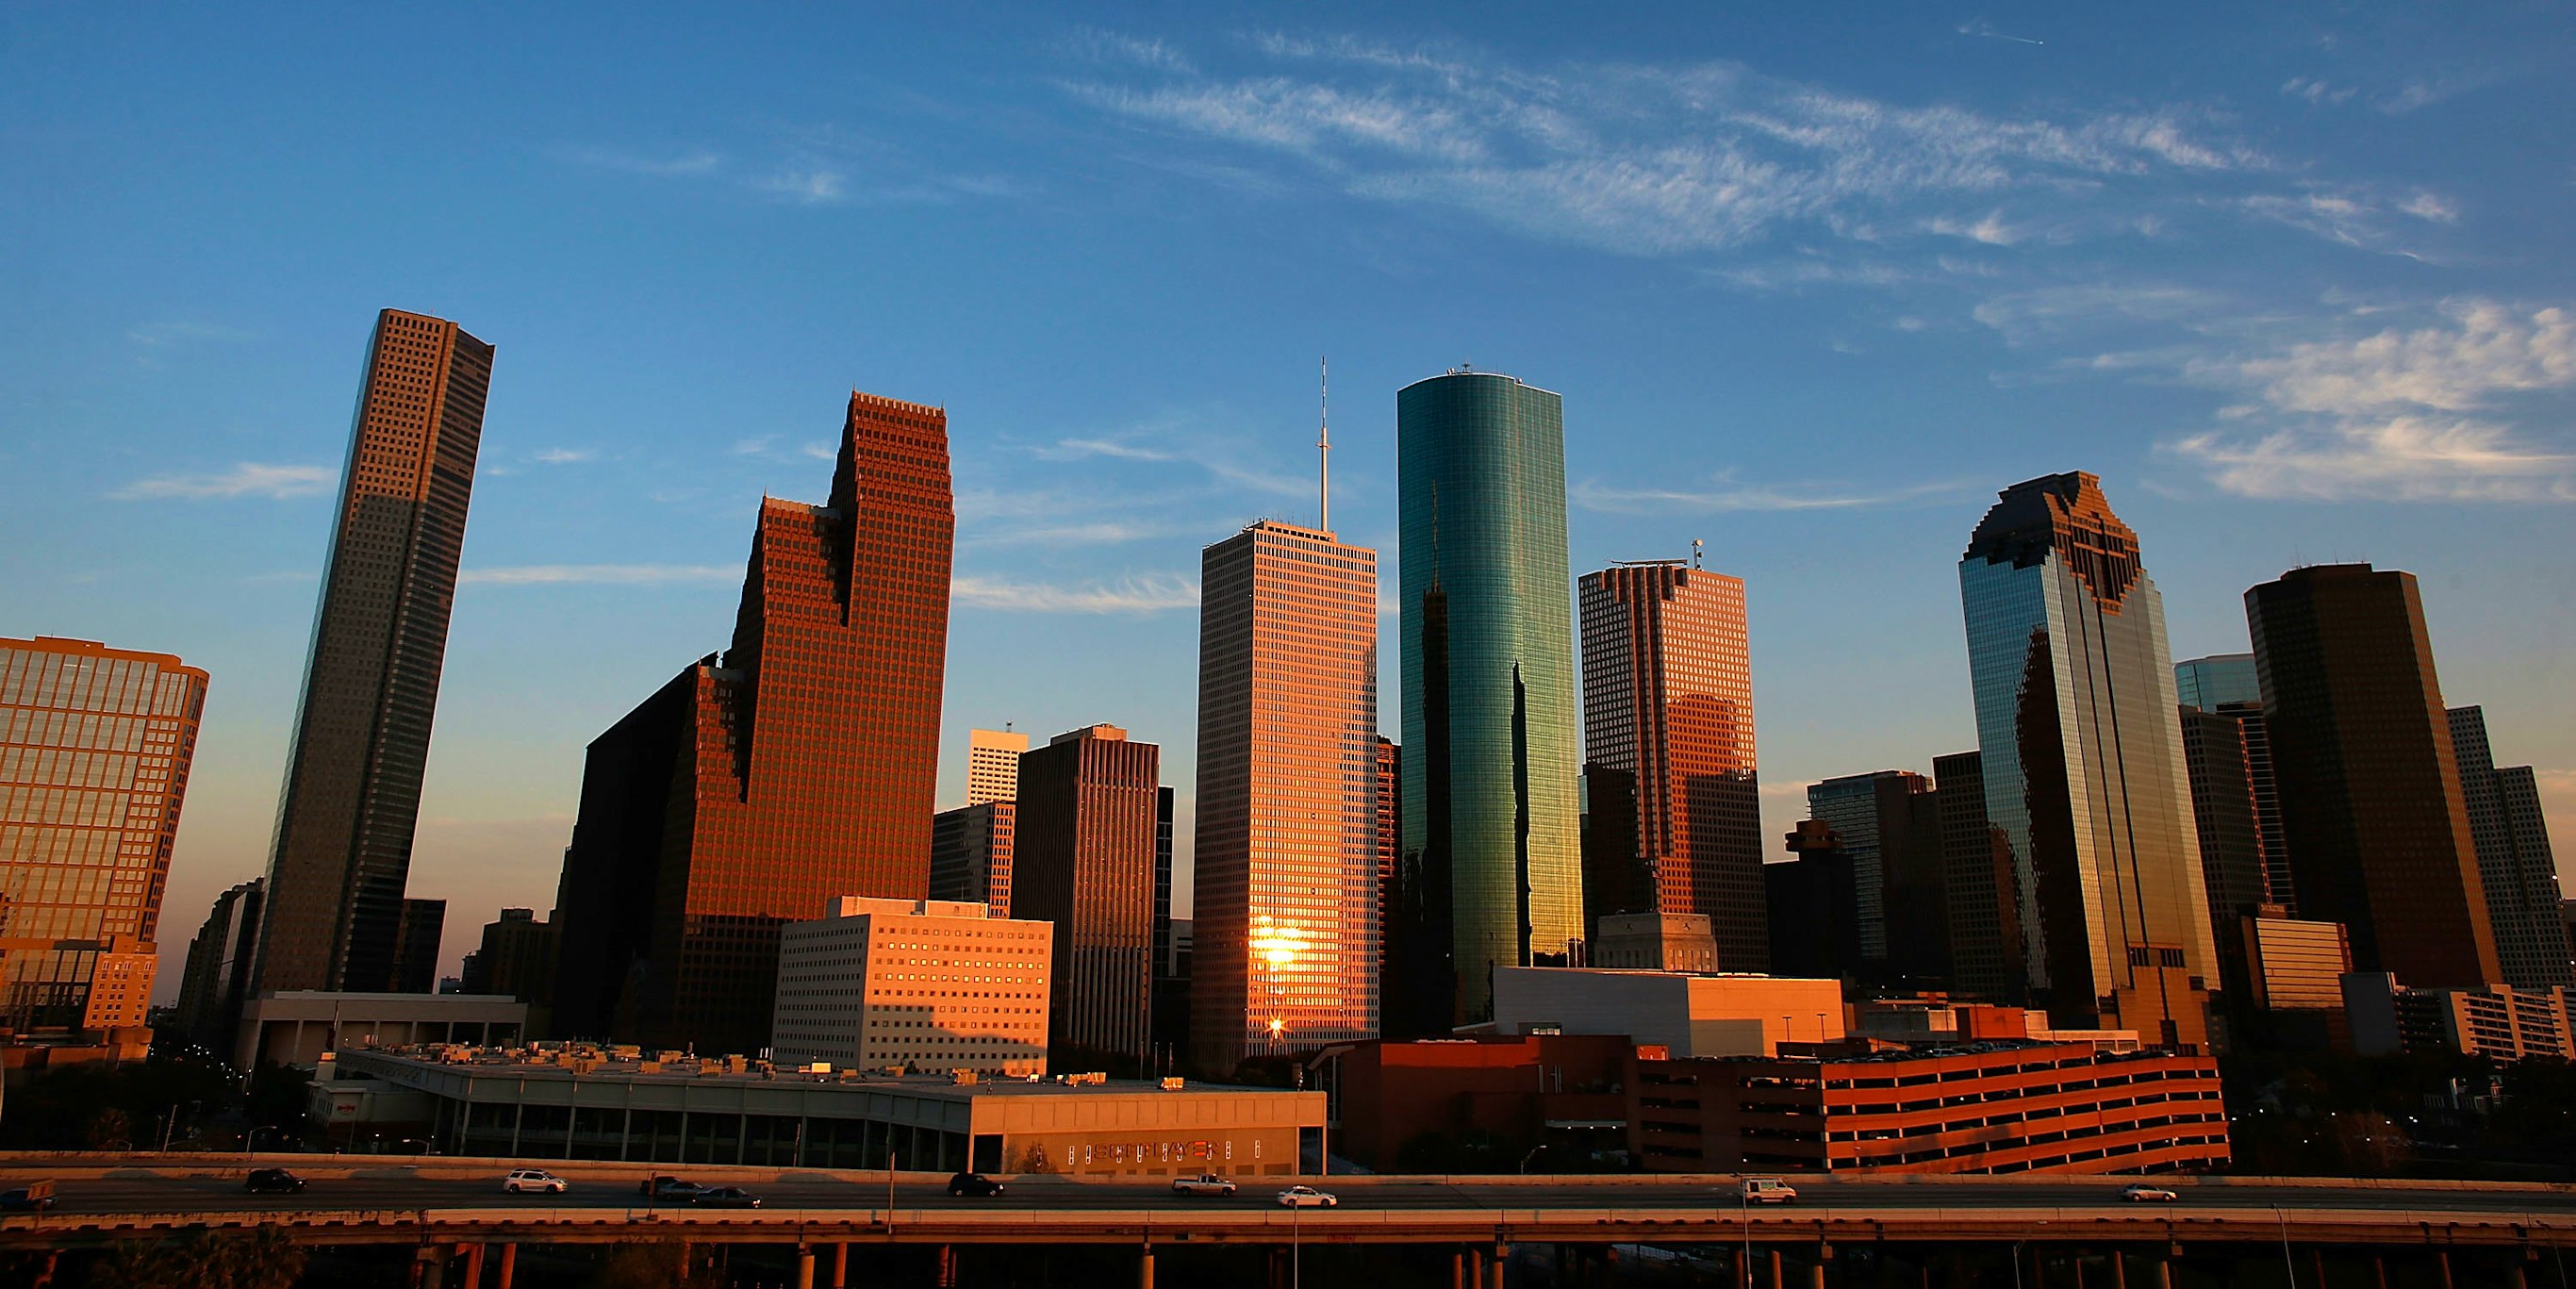 A view of the Houston skyline at dusk,